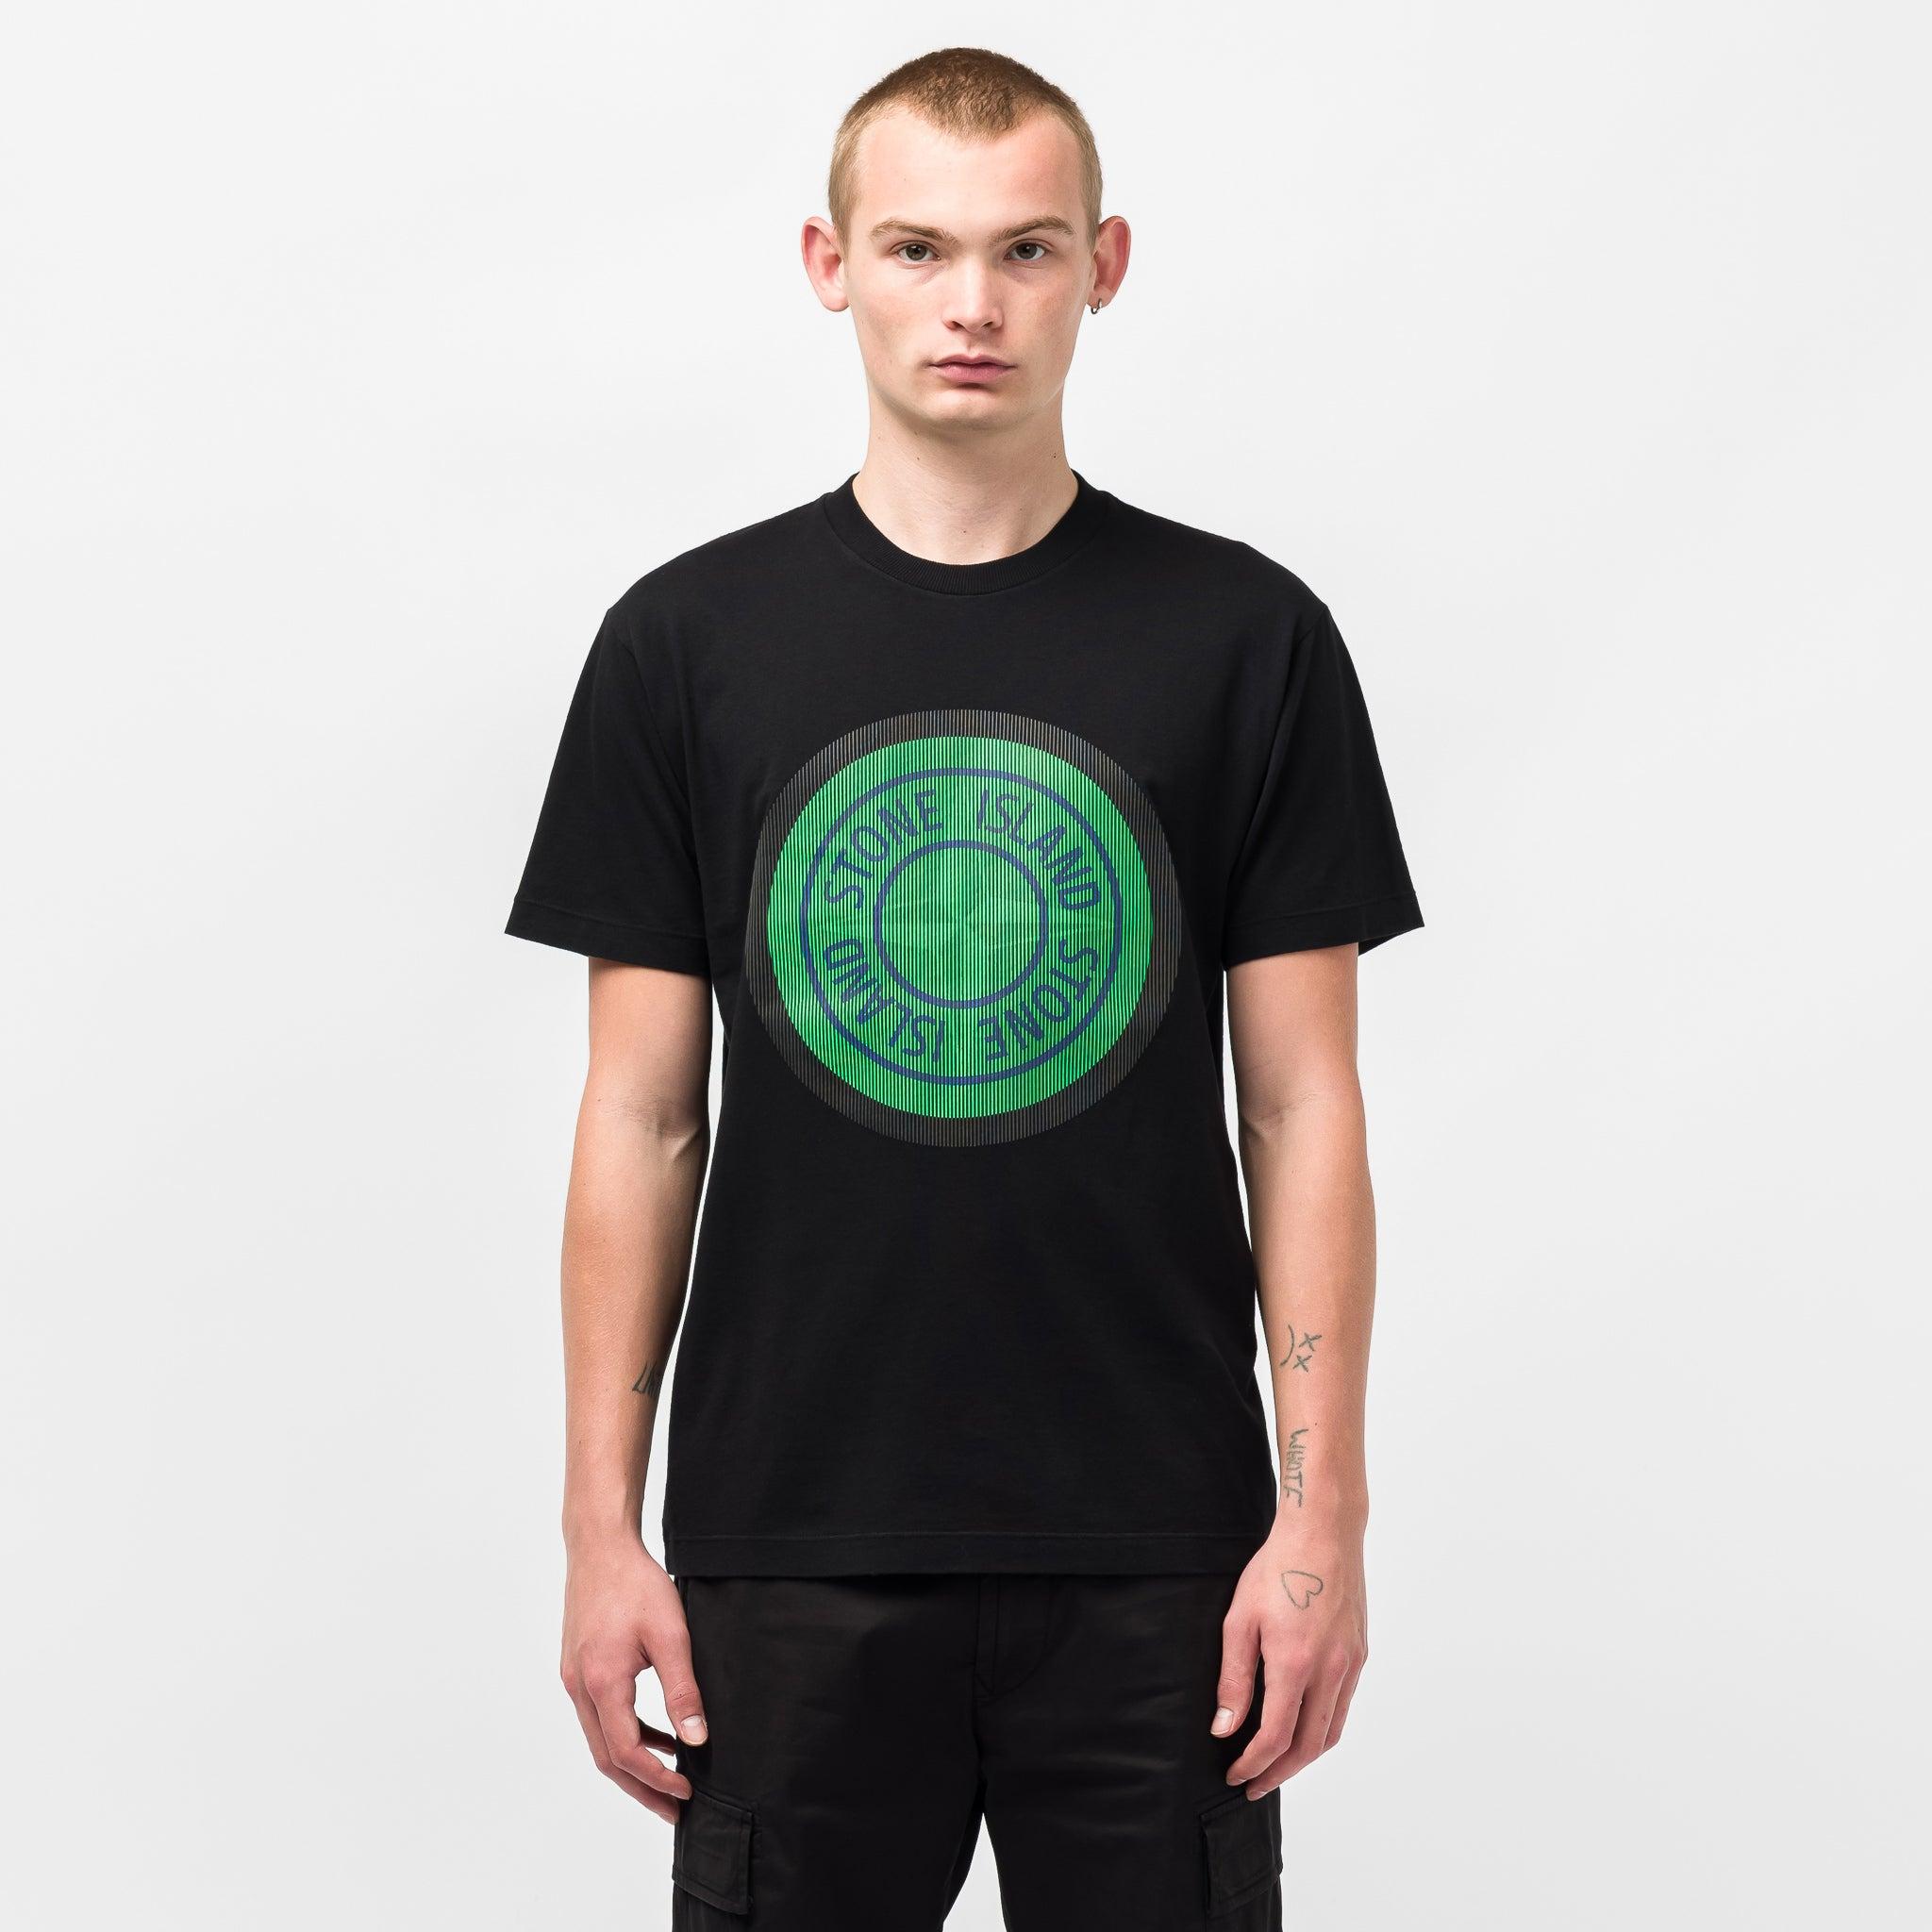 Stone Island Cotton 2ns89 Logo T-shirt in Black for Men - Lyst